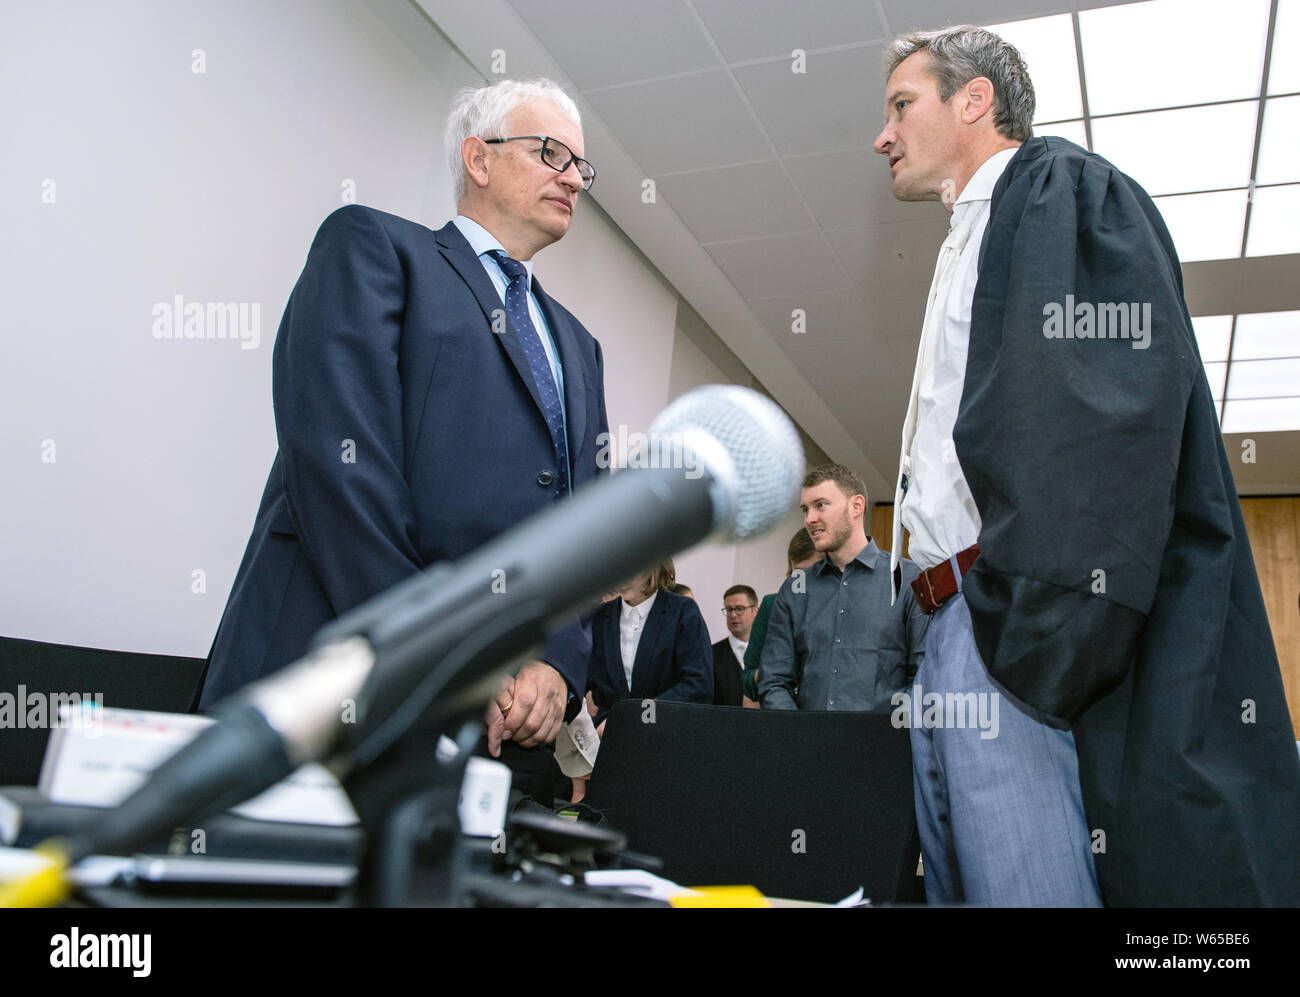 31 July 2019, North Rhine-Westphalia, Münster: Jürgen Resch (l), Federal Managing Director of Deutsche Umwelthilfe, and lawyer Remo Klinger talk to each other before the trial begins. The Higher Administrative Court of North Rhine-Westphalia is hearing the action brought by Deutsche Umwelthilfe (German Environmental Aid) against the city of Aachen for the continuation of the Cologne district government's air pollution control plans. The aim is to take measures to ensure that the limit values for nitrogen dioxide are complied with as quickly as possible. Photo: Guido Kirchner/dpa Stock Photo